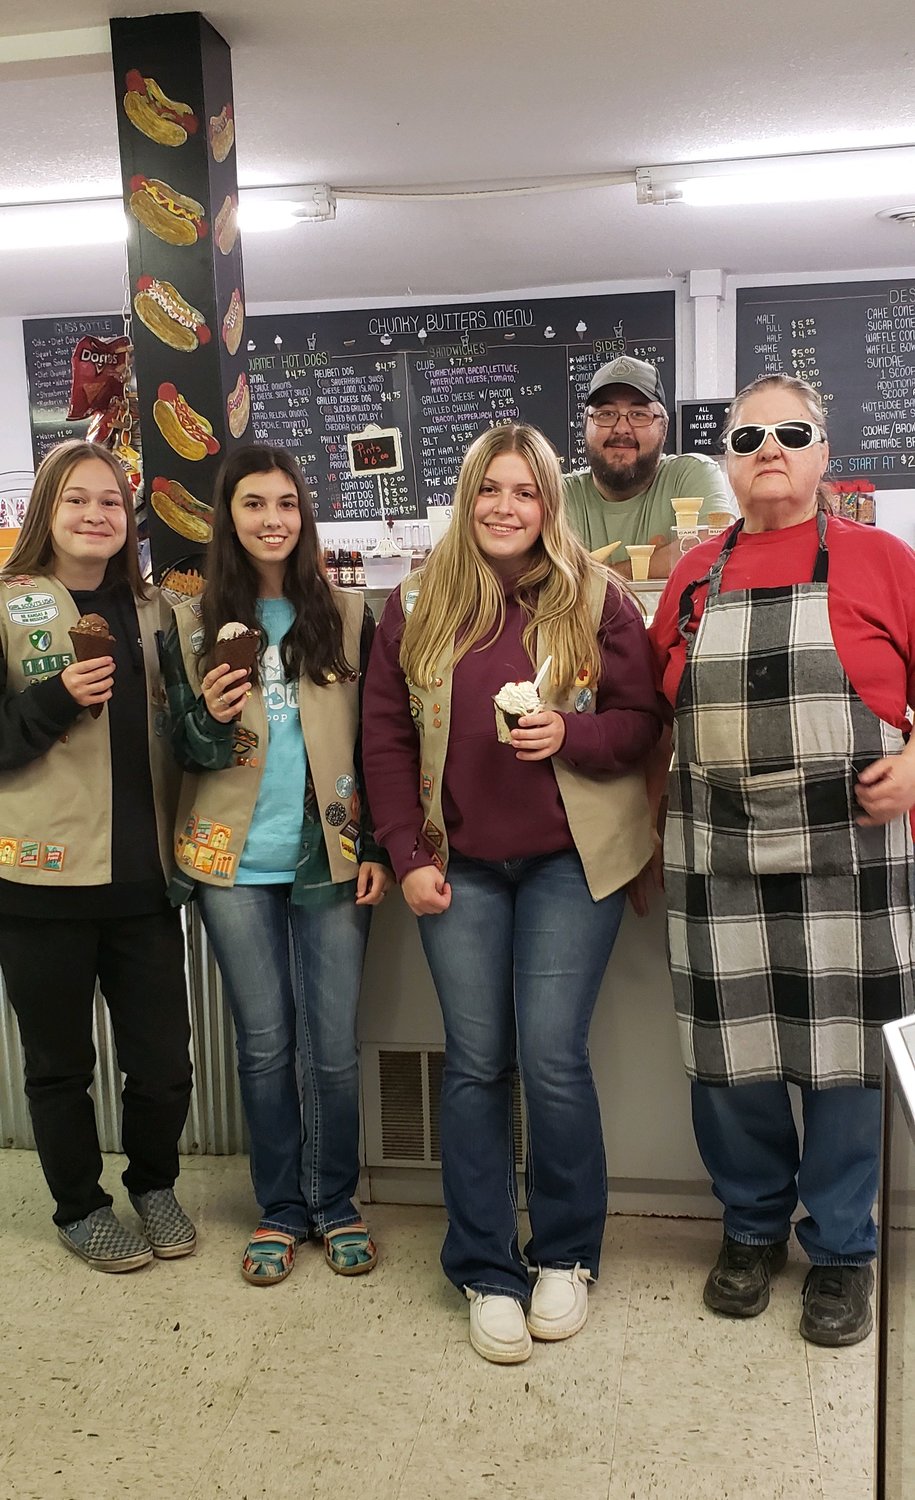 Members of Girl Scout Troop 1115 enjoy locally sourced ice cream at Chunky Butters in downtown Holden. Chunky Butters also serves other dishes such as hot dogs, fries, and grilled sandwiches.